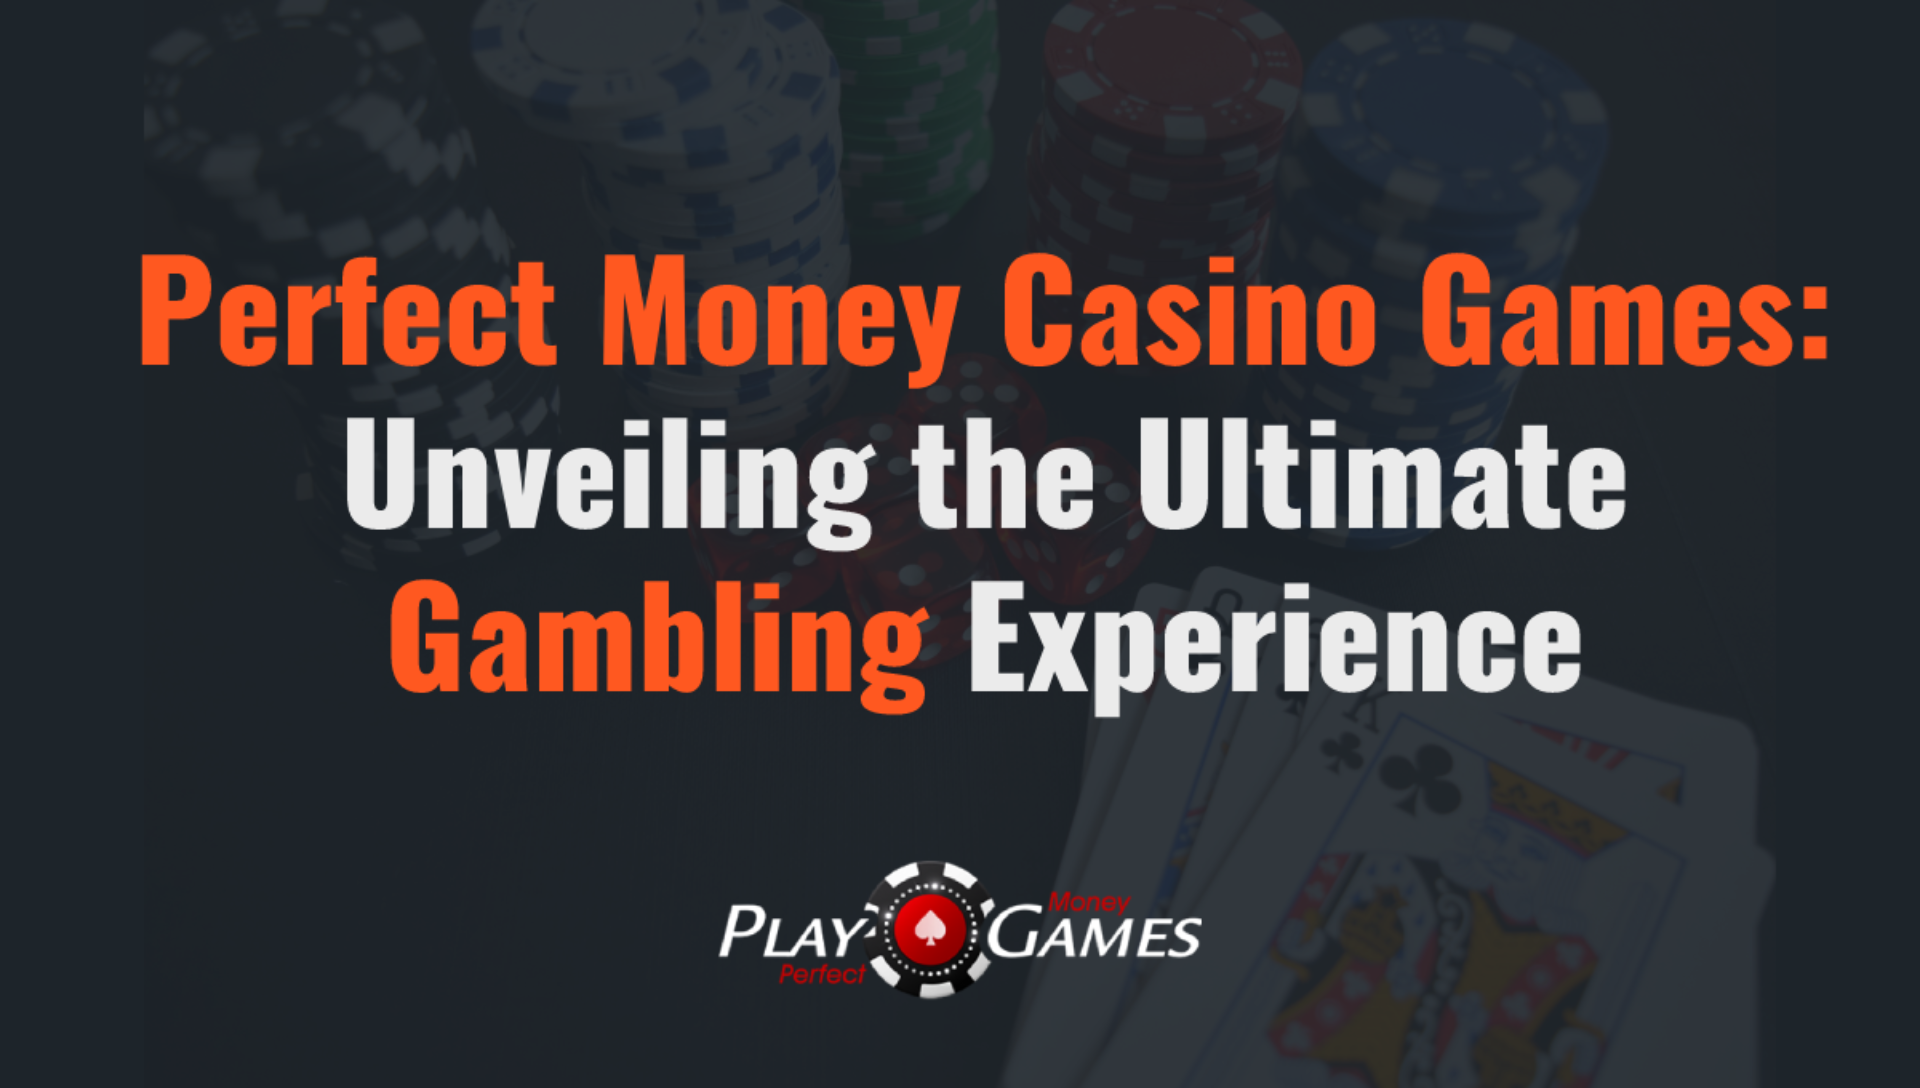 Perfect Money Casino Games: Unveiling the Ultimate Gambling Experience